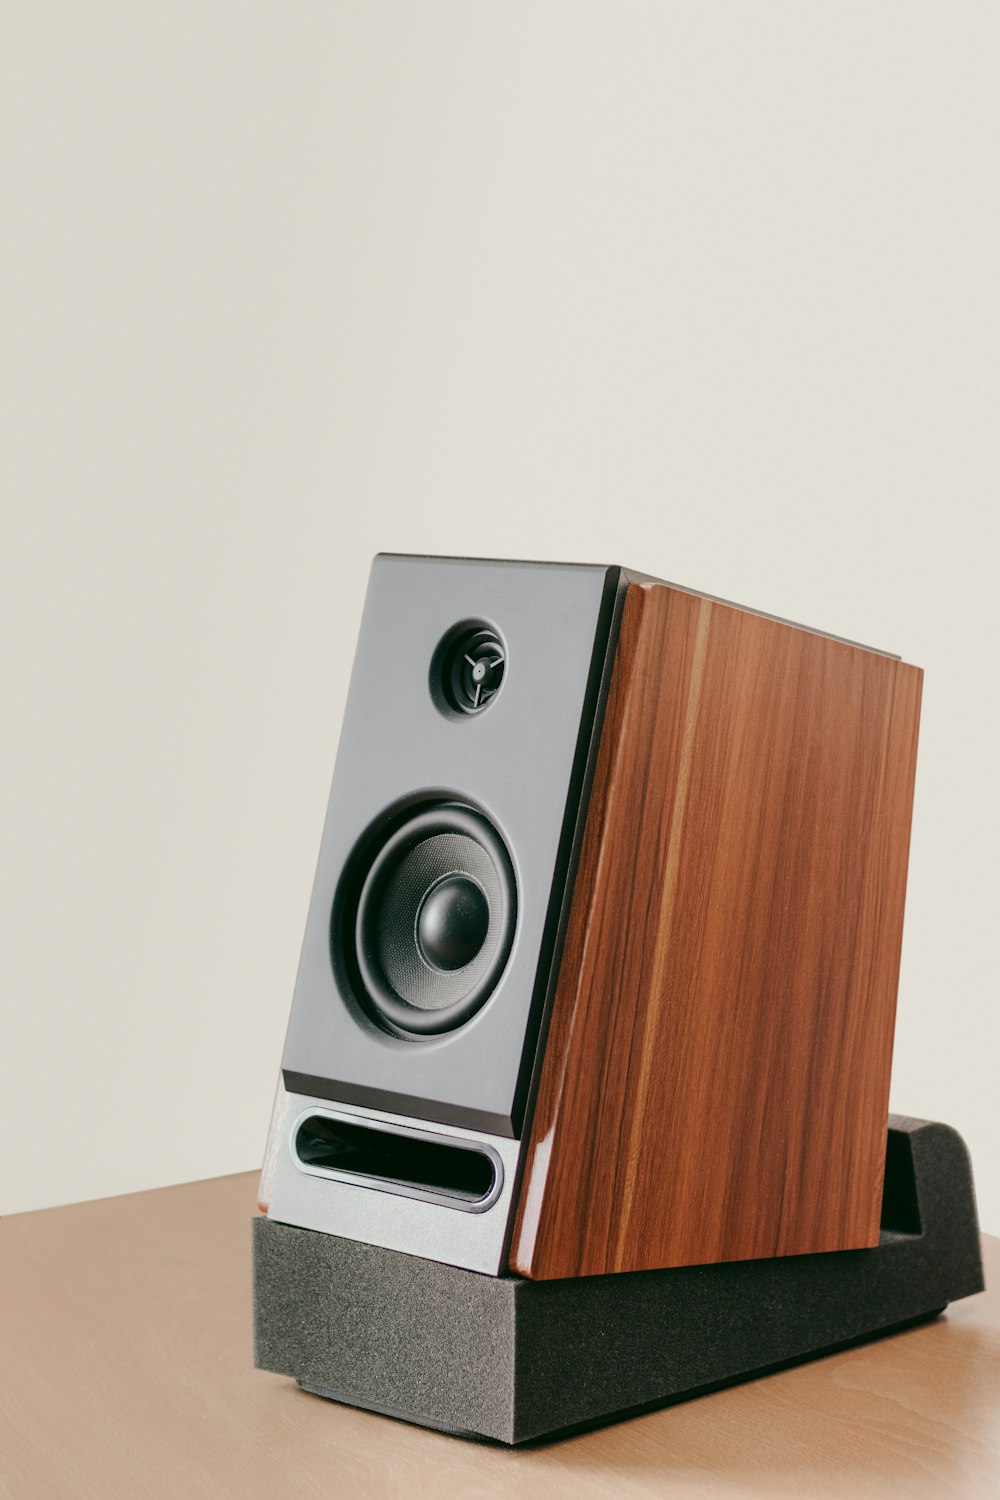 a speaker on a wooden table